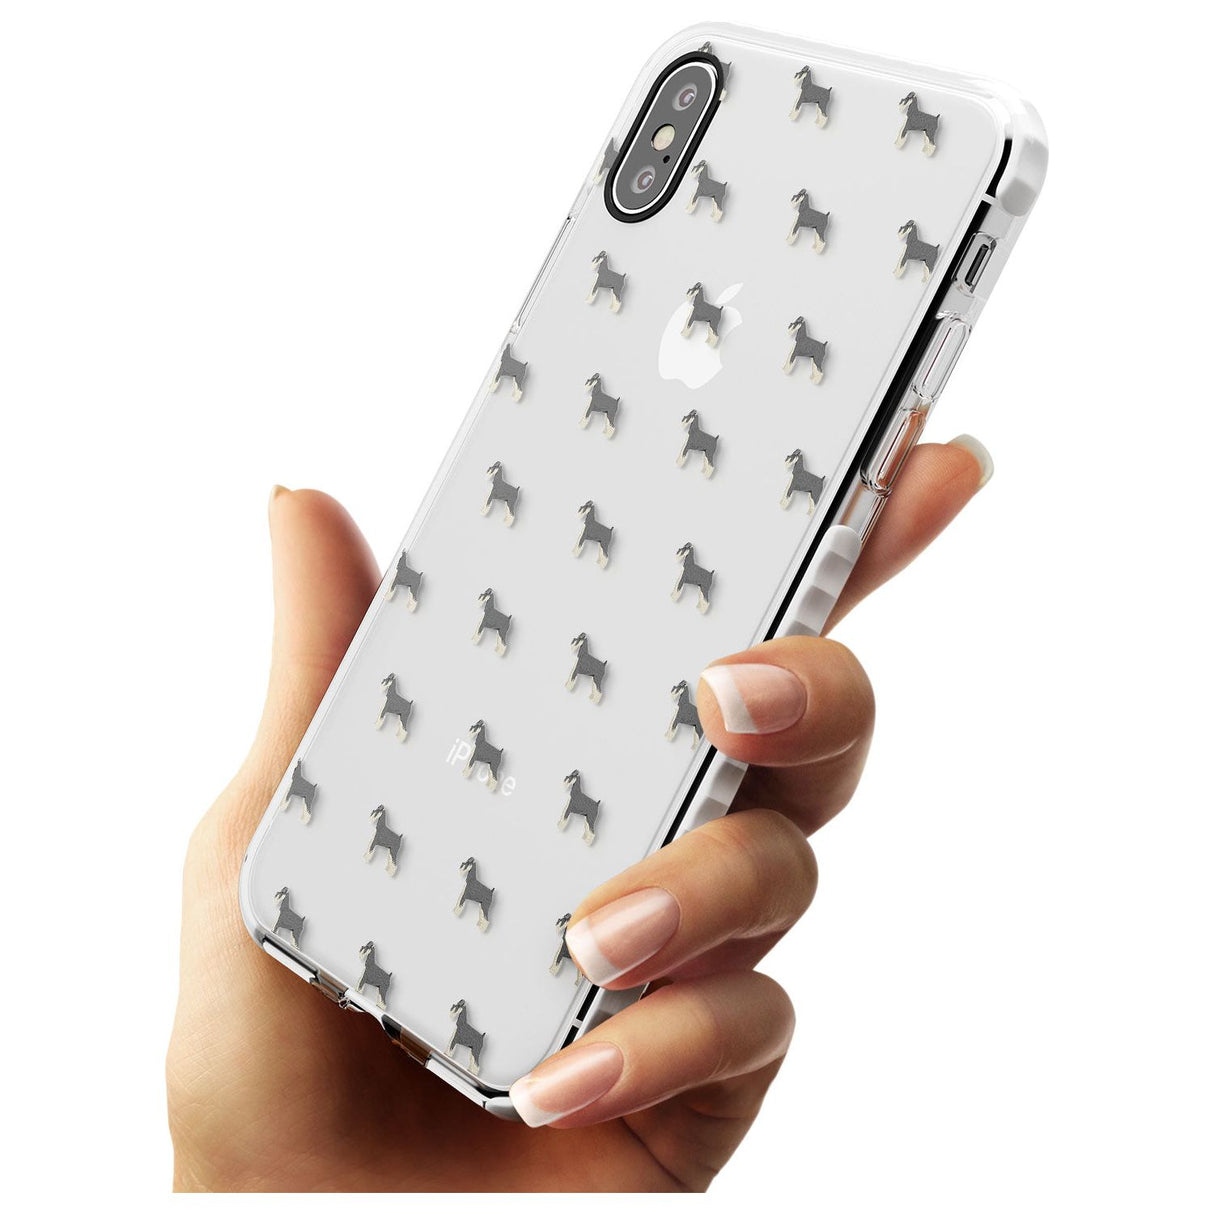 Schnauzer Dog Pattern Clear Impact Phone Case for iPhone X XS Max XR